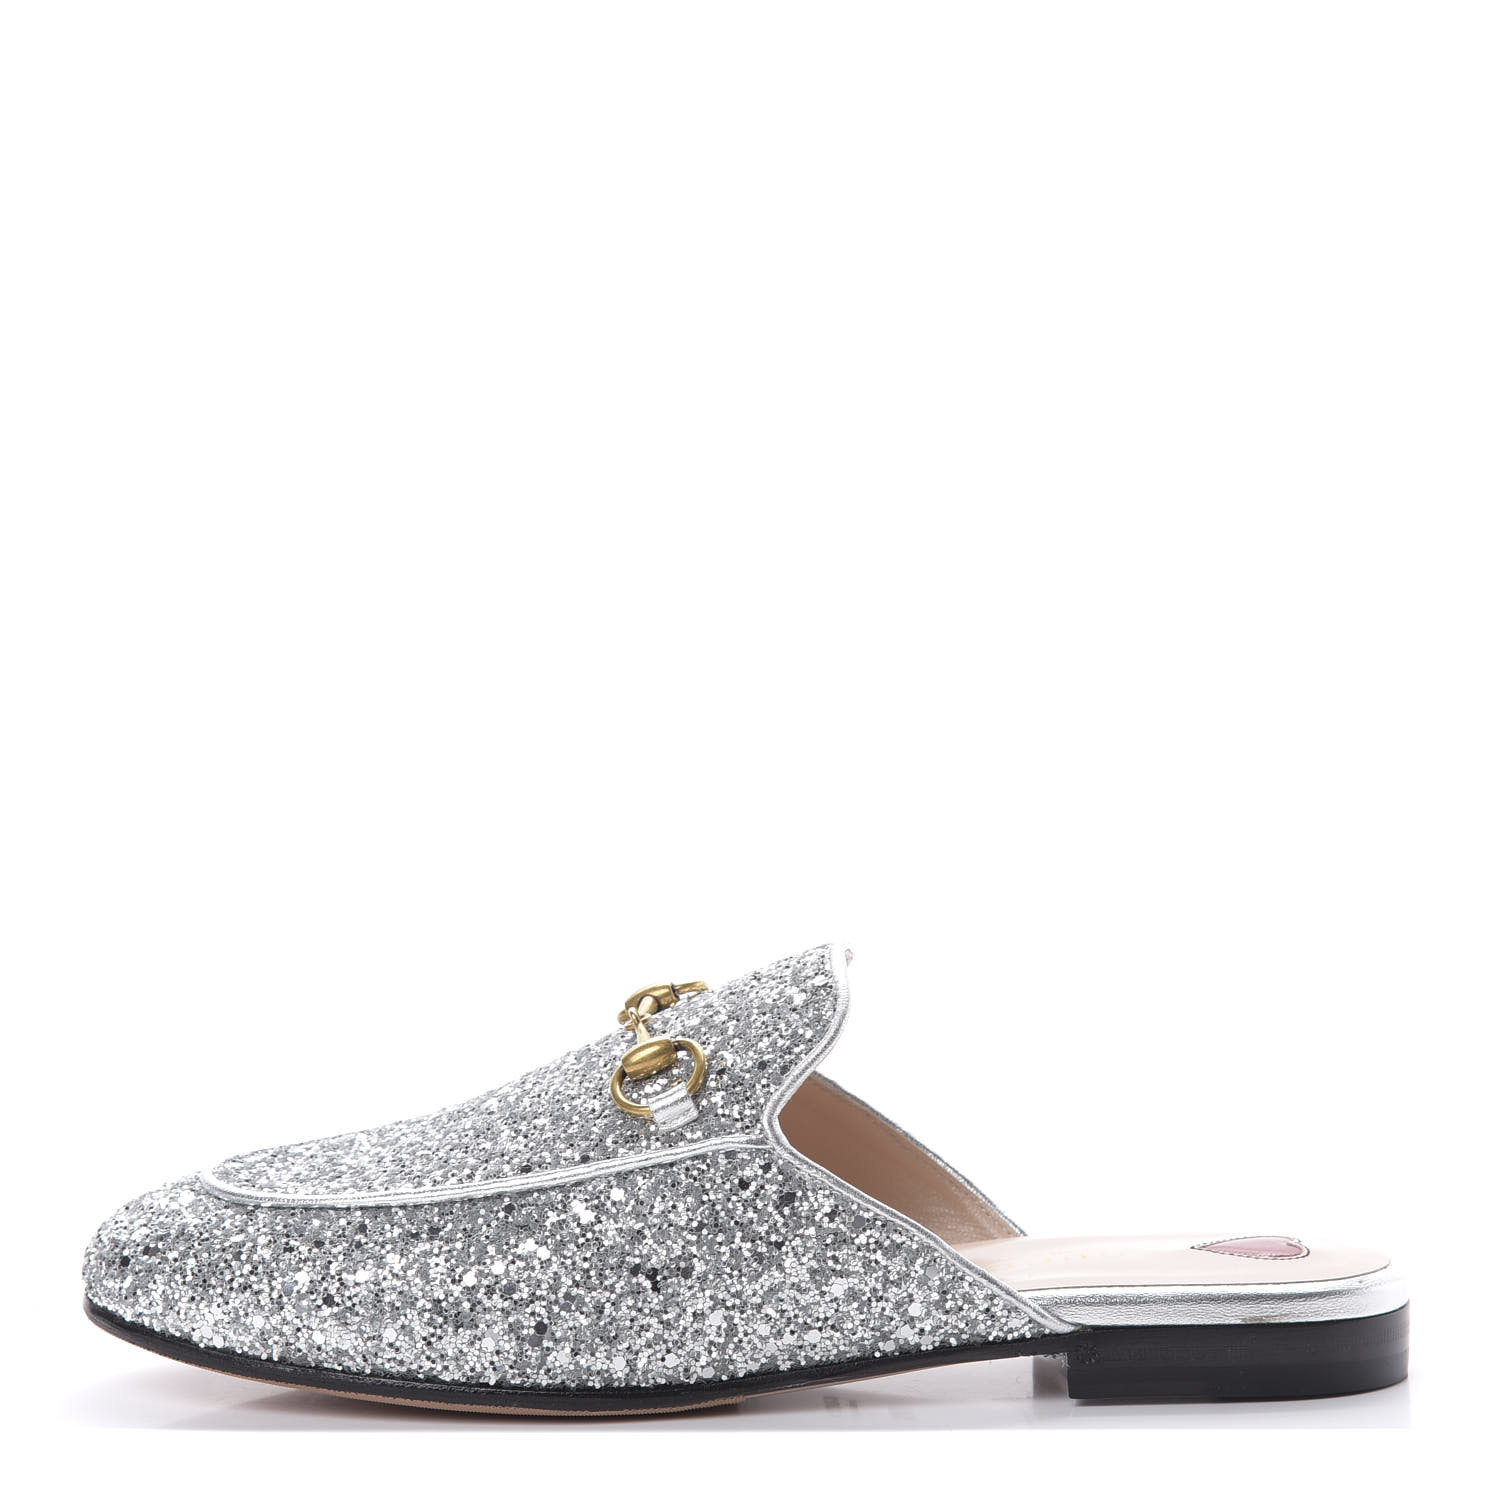 GUCCI Glitter Womens Princetown Slippers 37.5 Silver 628726